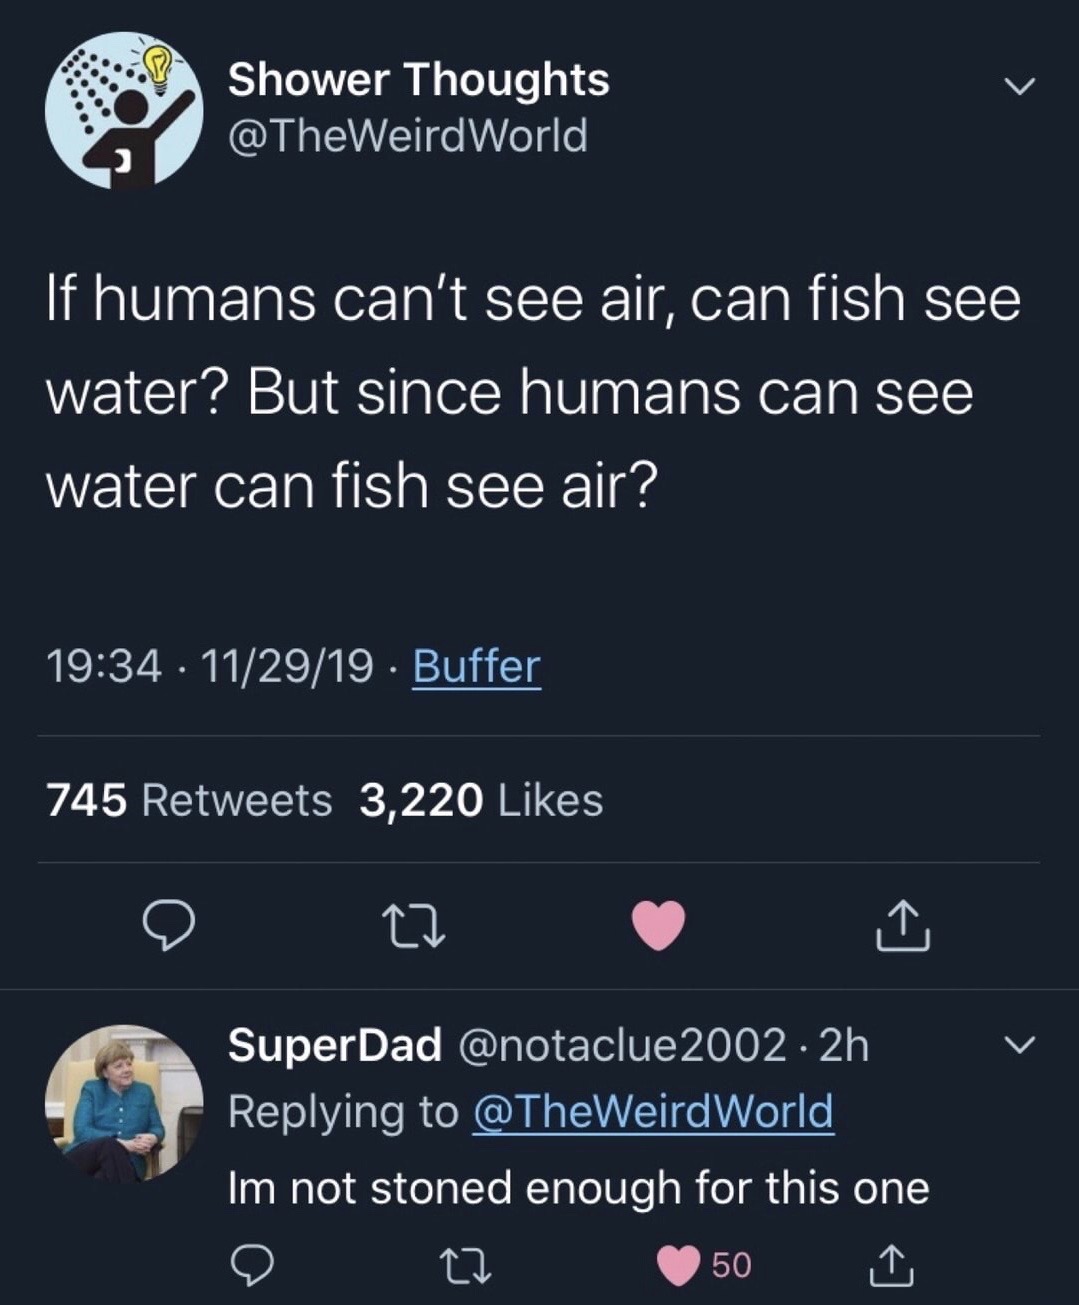 ex quotes twitter - Shower Thoughts World 'If humans can't see air, can fish see water? But since humans can see water can fish see air? 112919 Buffer 745 3,220 le 22 SuperDad 2002 2h Im not stoned enough for this one 2 22 50